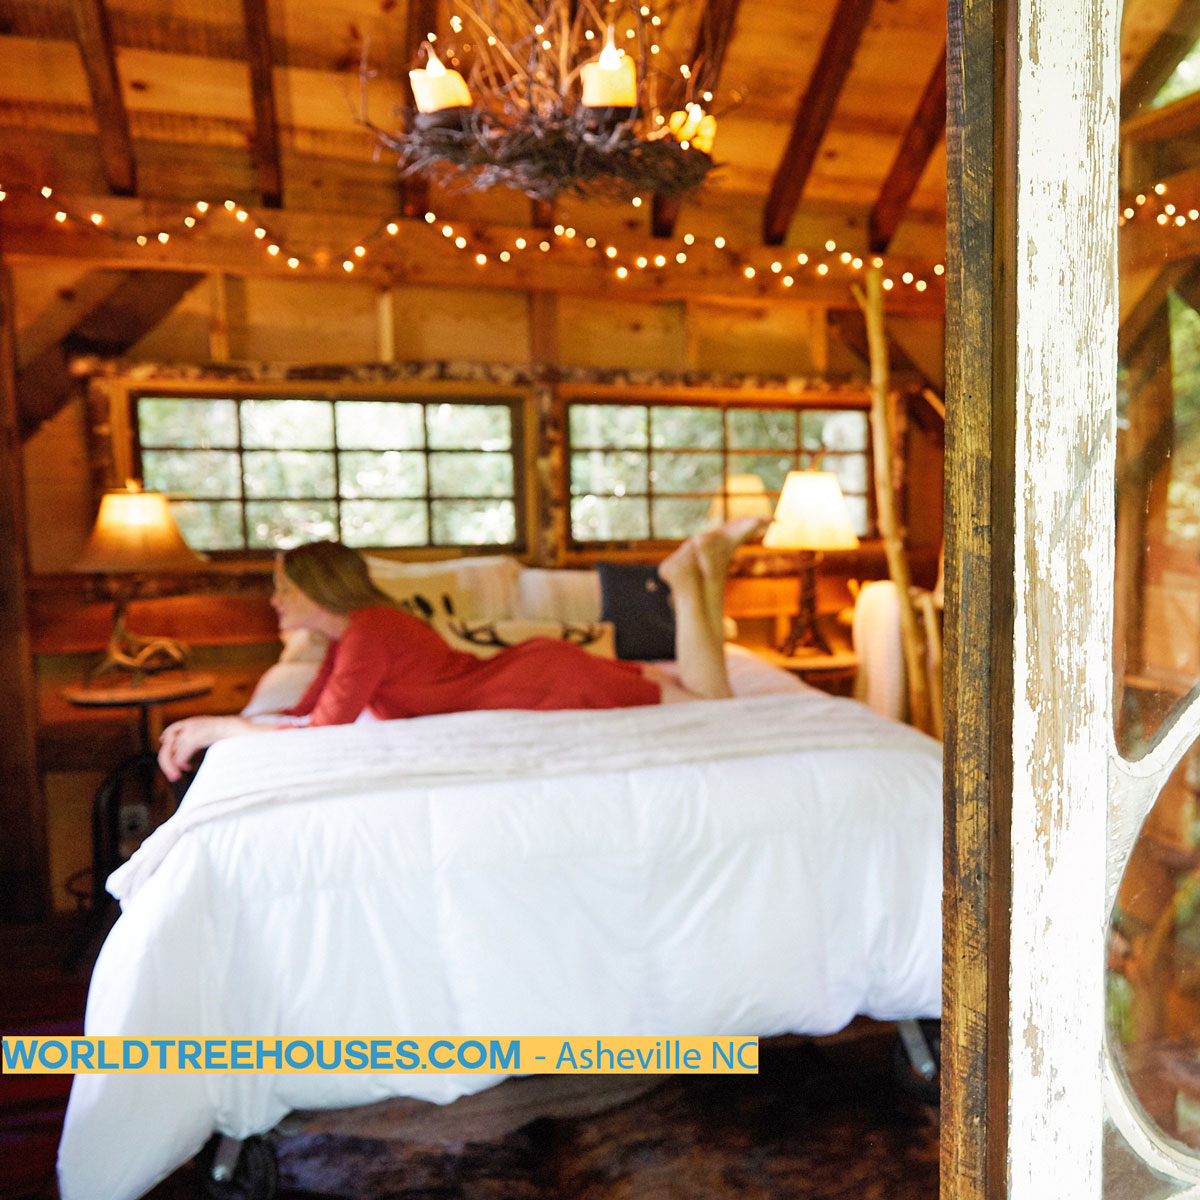 Western NC tree house builder: Panthertown Treehouse: A true escape